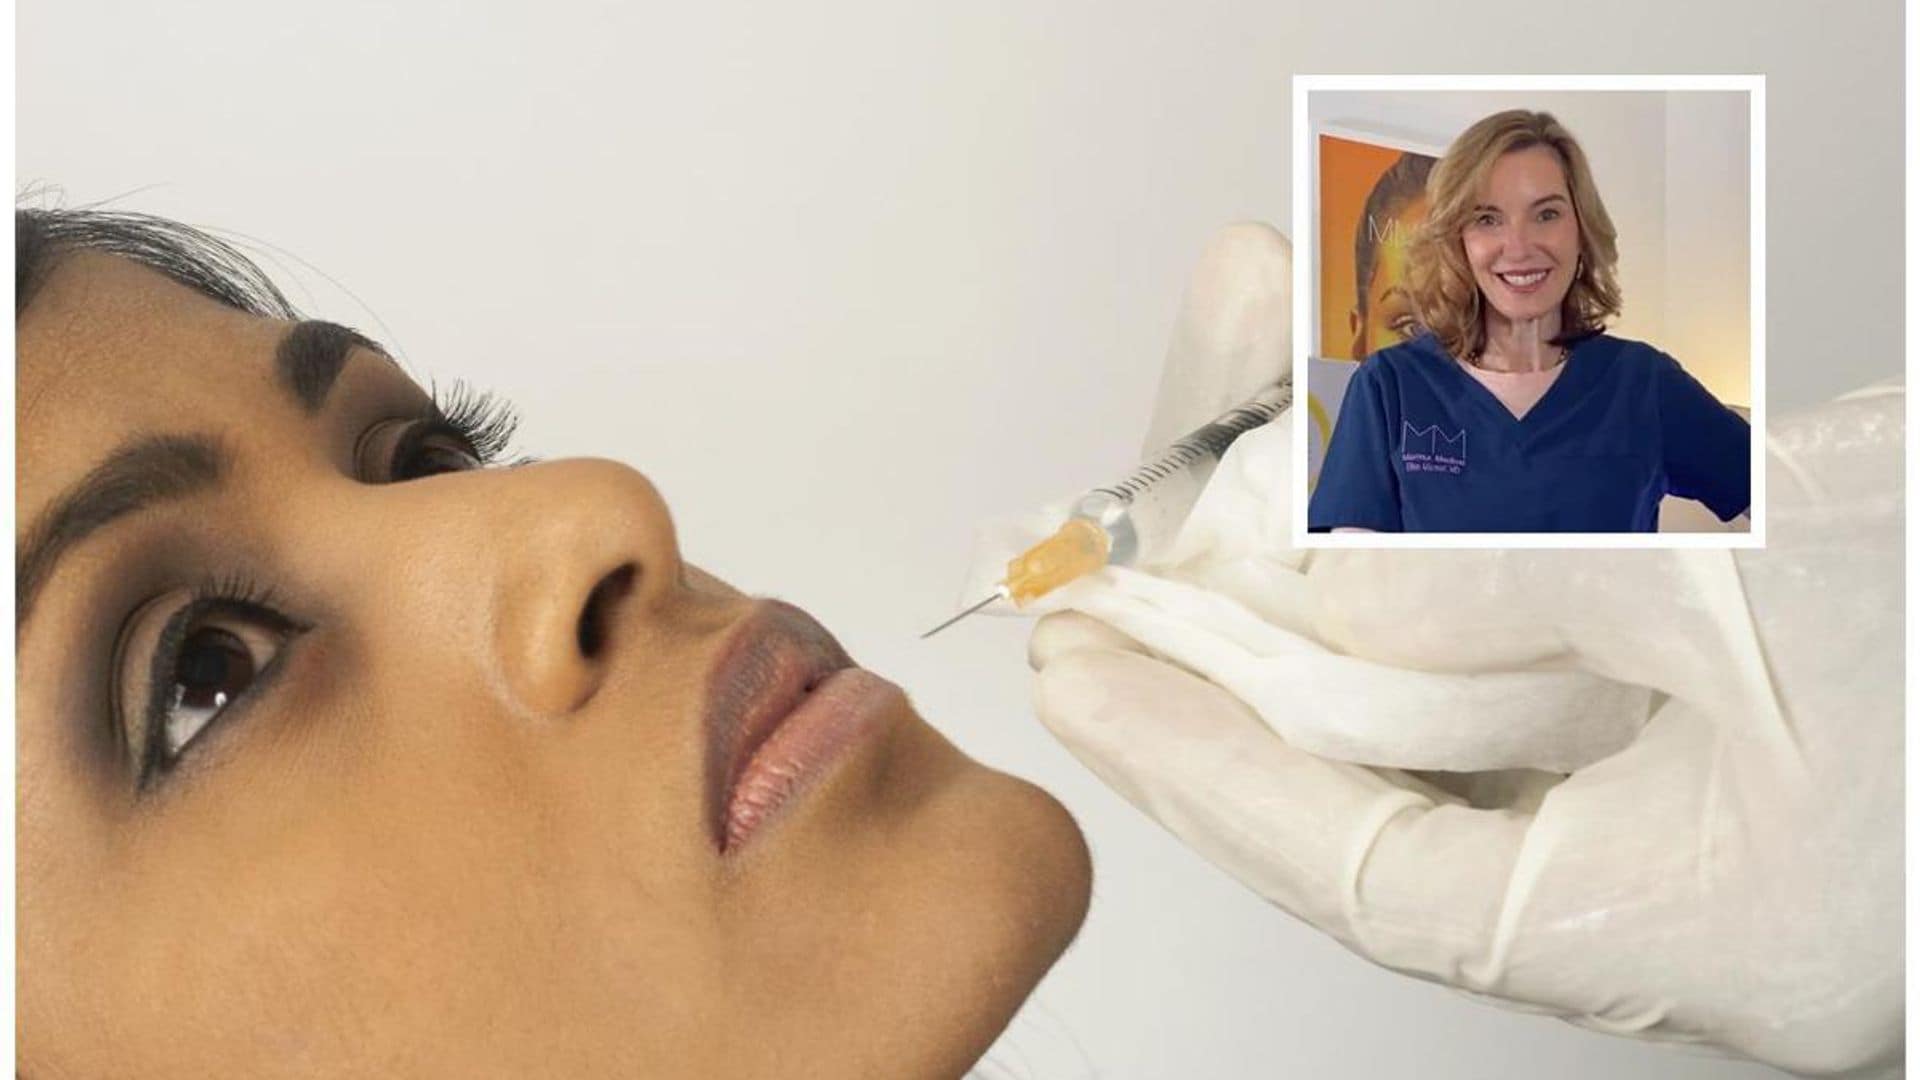 People are using fillers to gain facial volume after losing weight with the infamous Skinny Pen